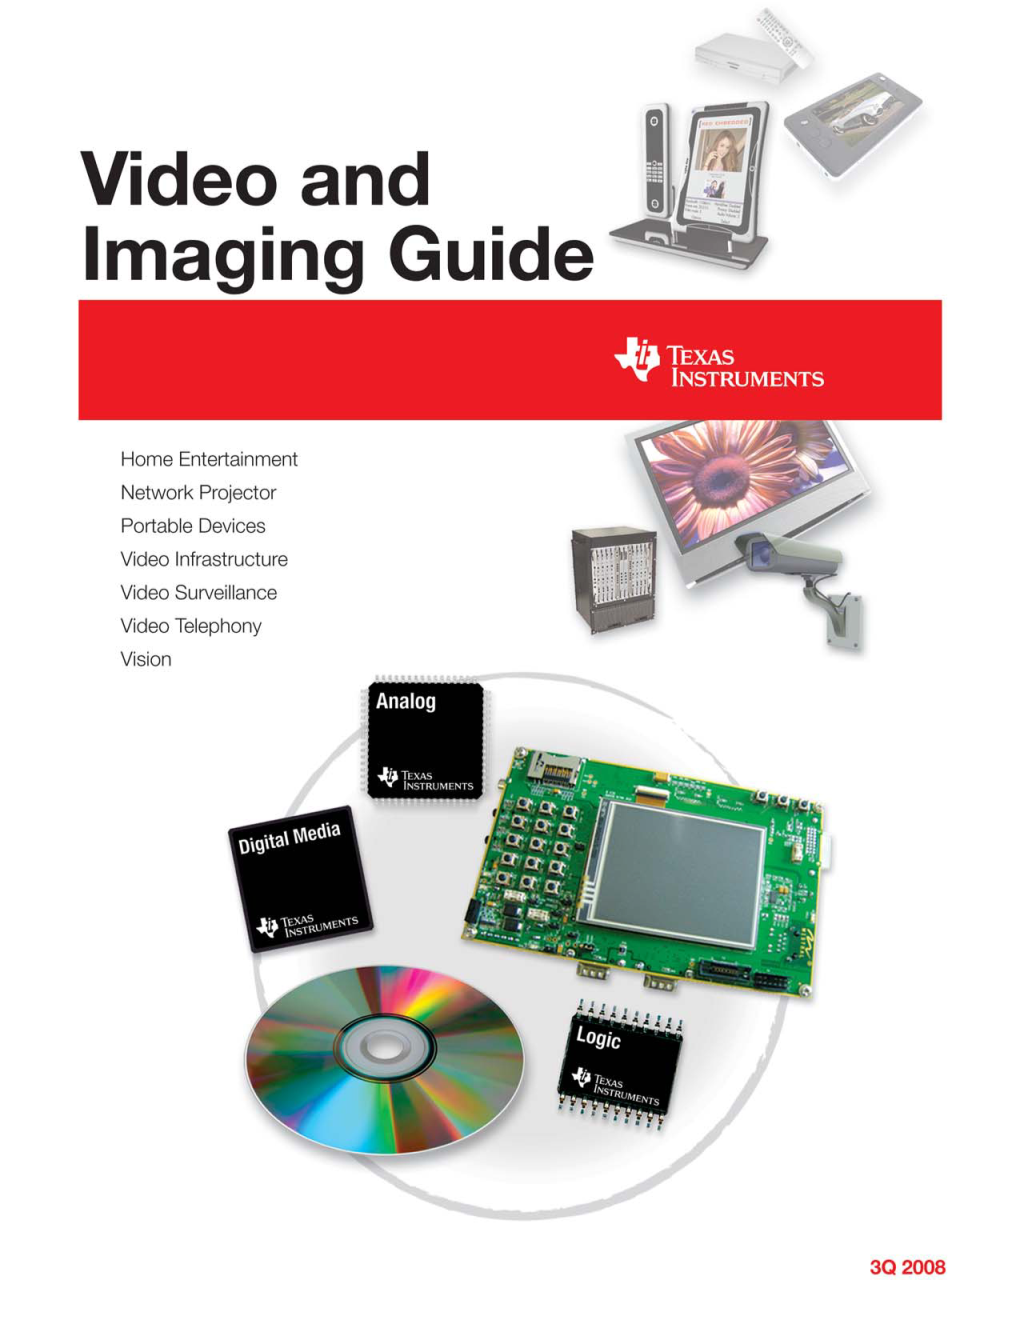 Video and Imaging Solutions Guide 3Q 2008